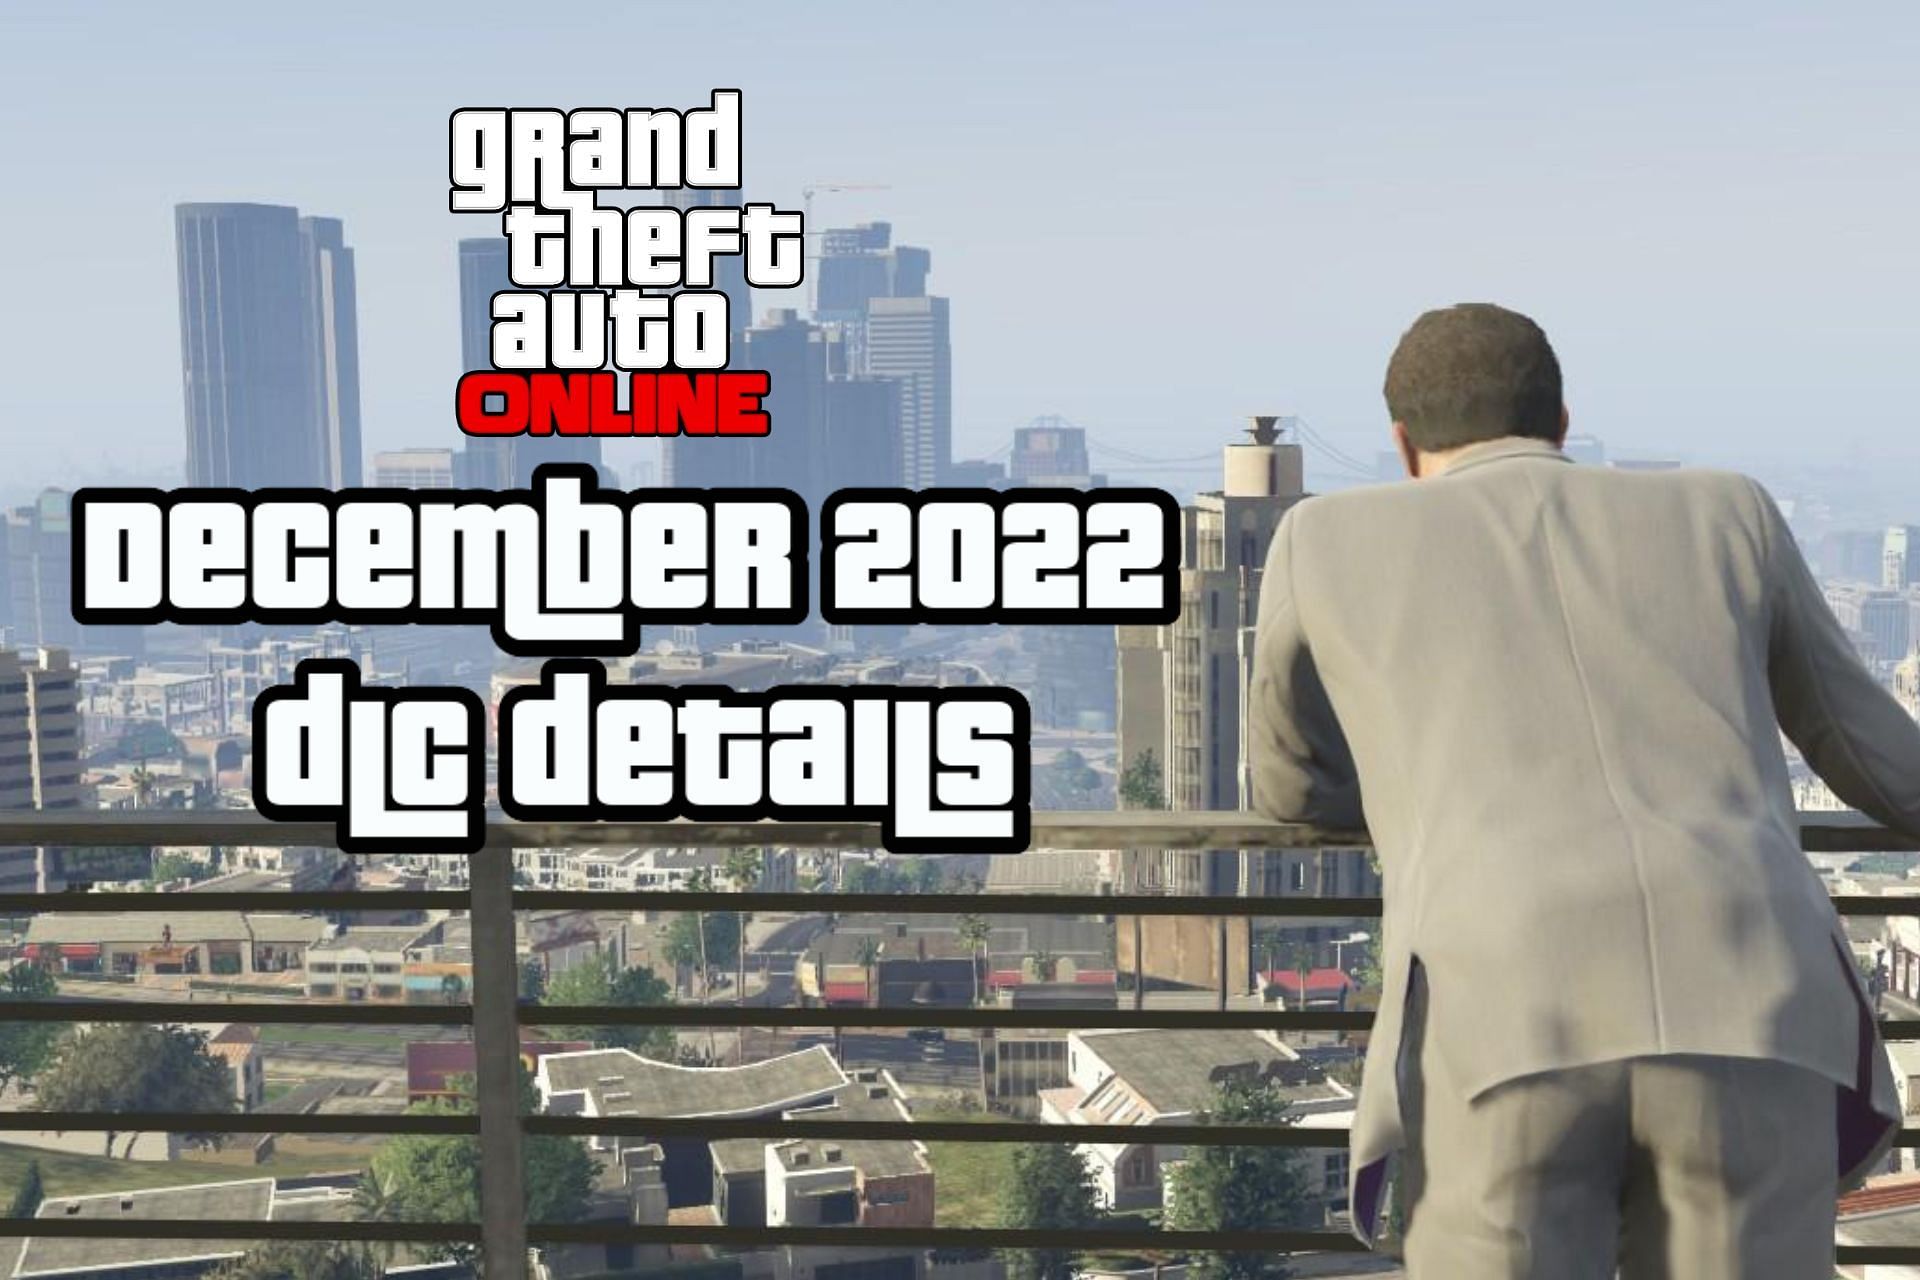 Michael is anticipated to make his GTA Online debut with the December 2022 DLC update (Image via GTABase)